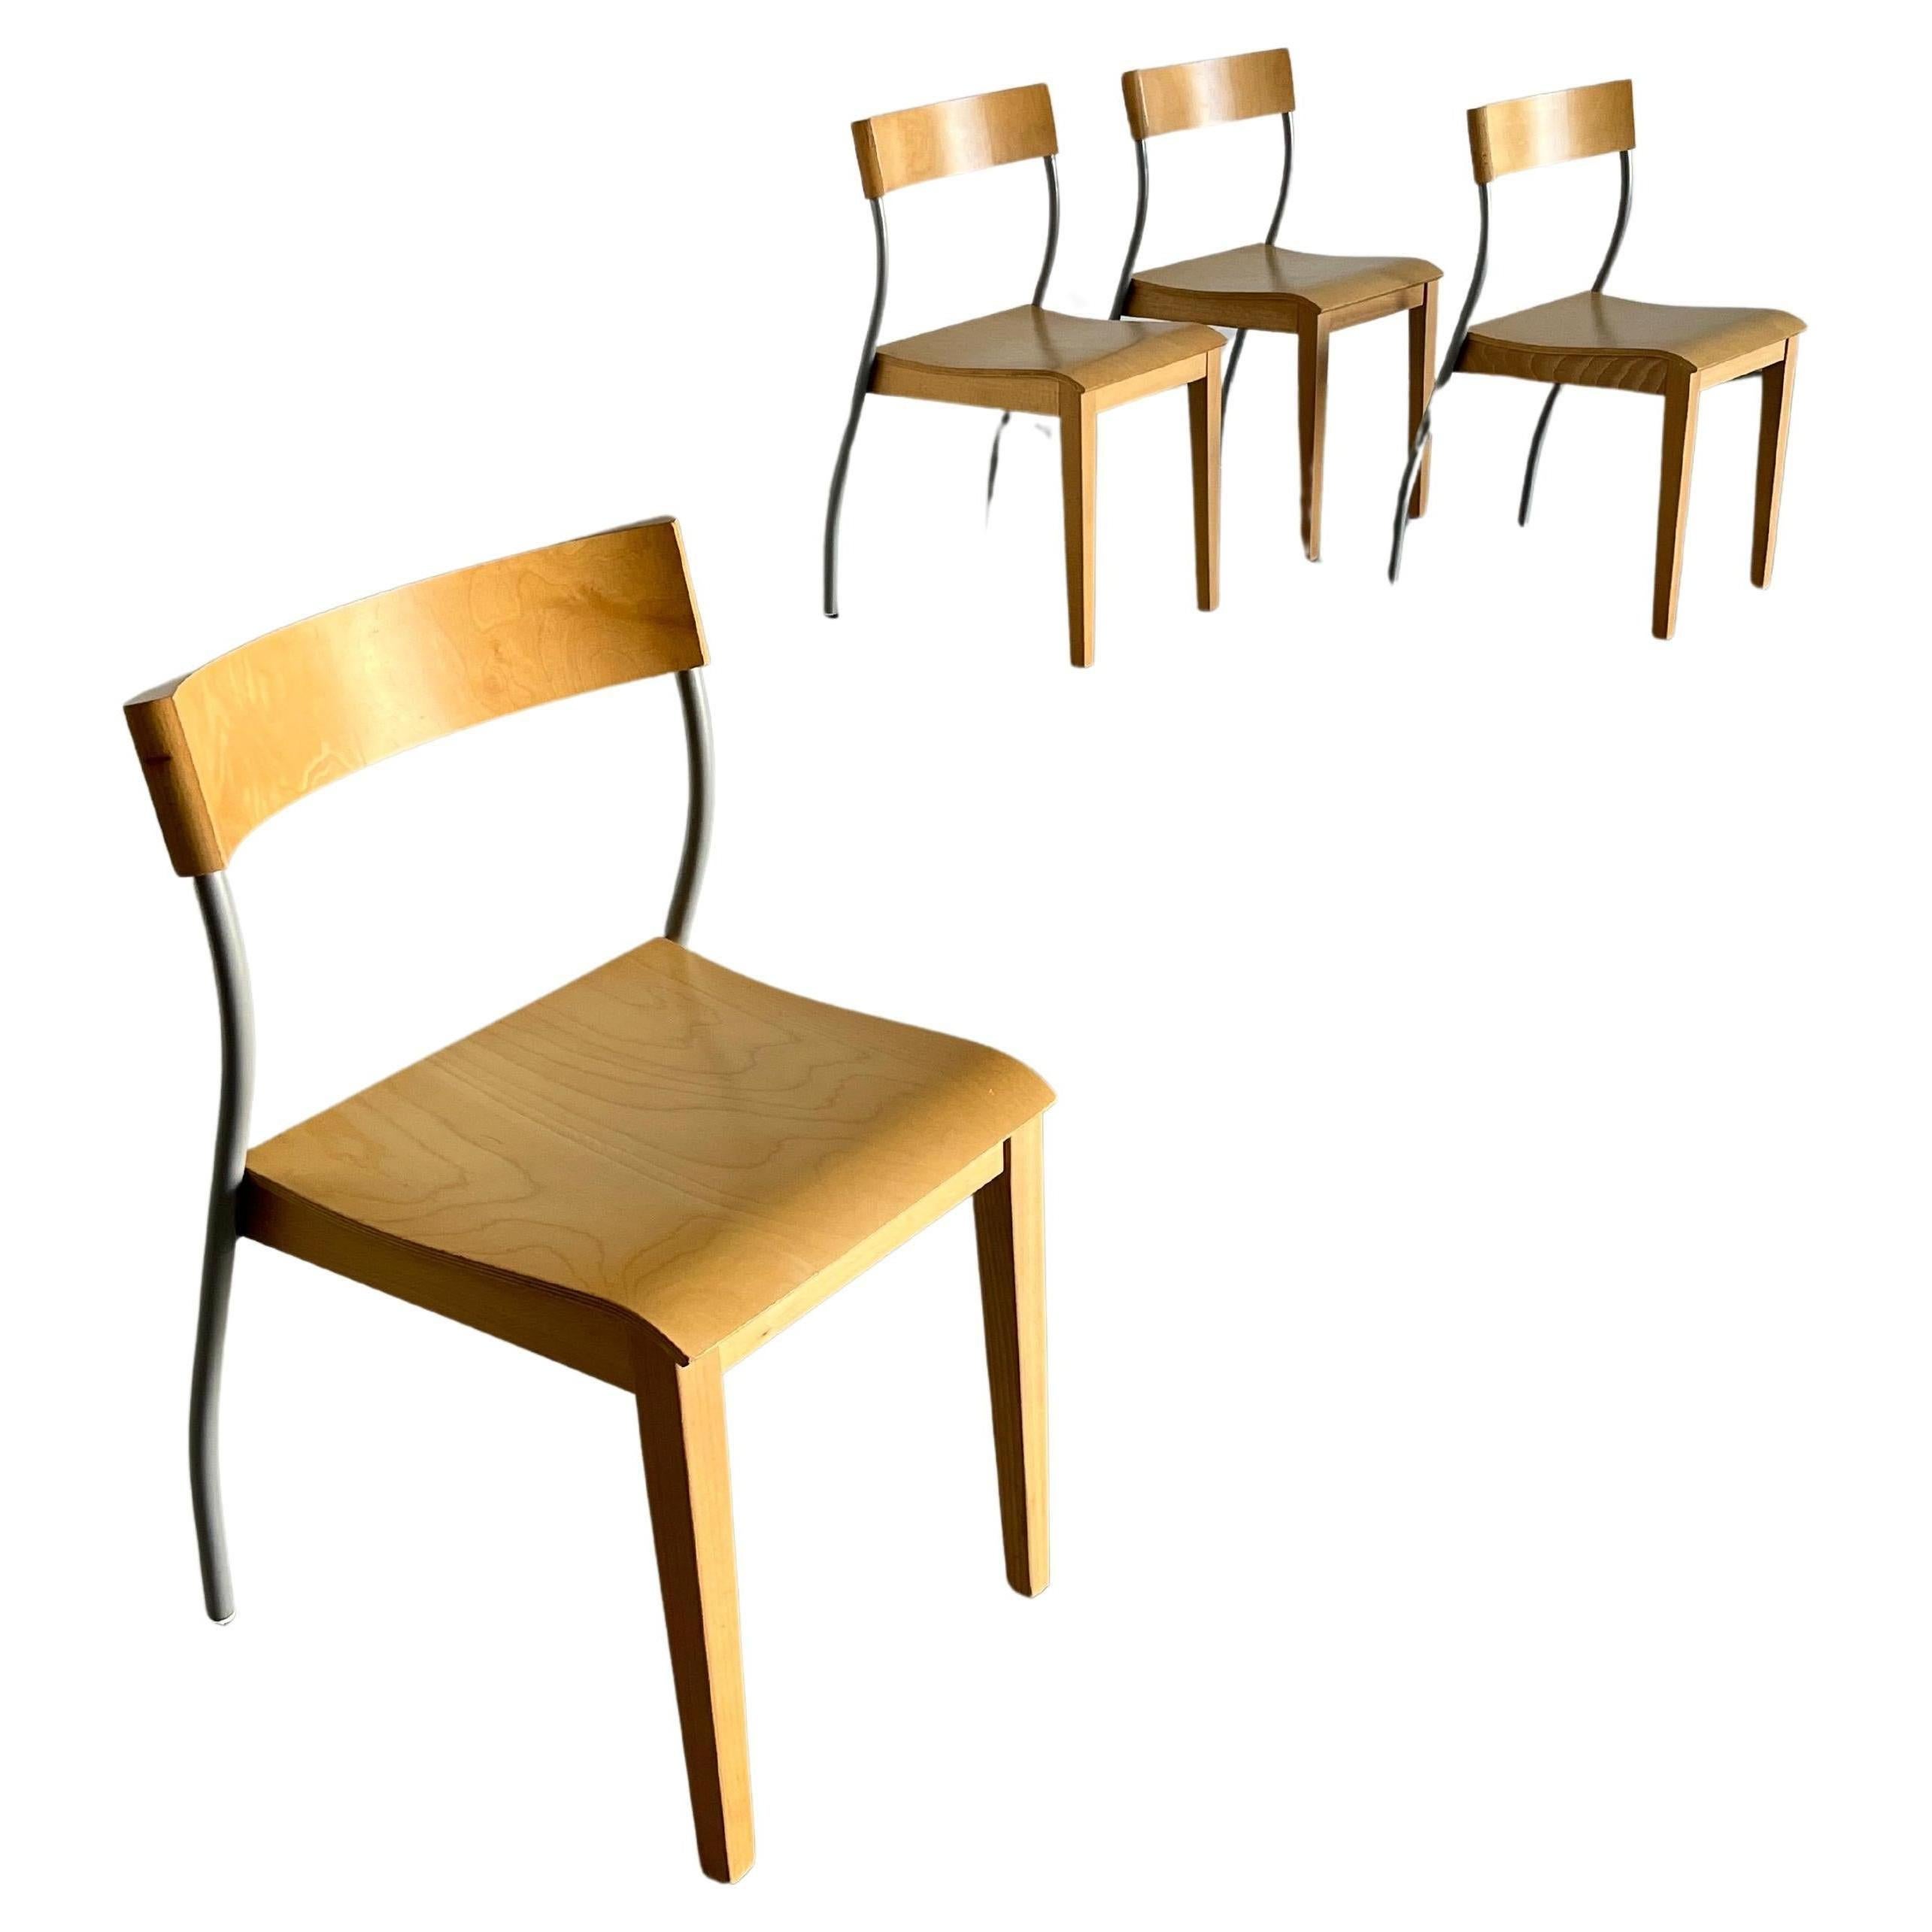 Set of 4 Vintage Ikea 'Nordisk' Postmodern Dining Chairs by Tina Christensen